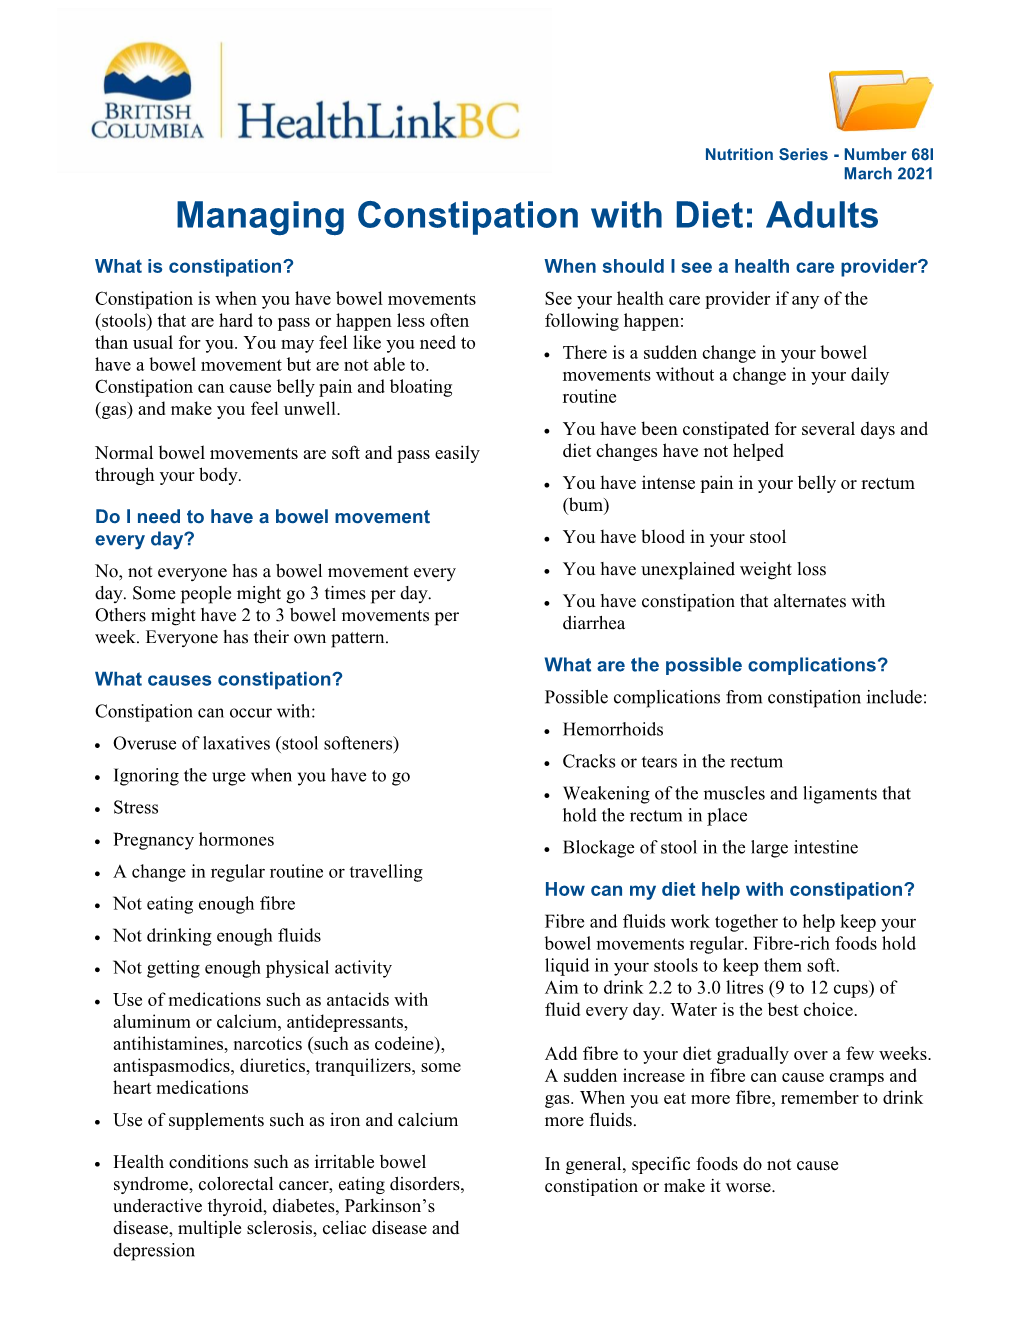 Managing Constipation with Diet: Adults